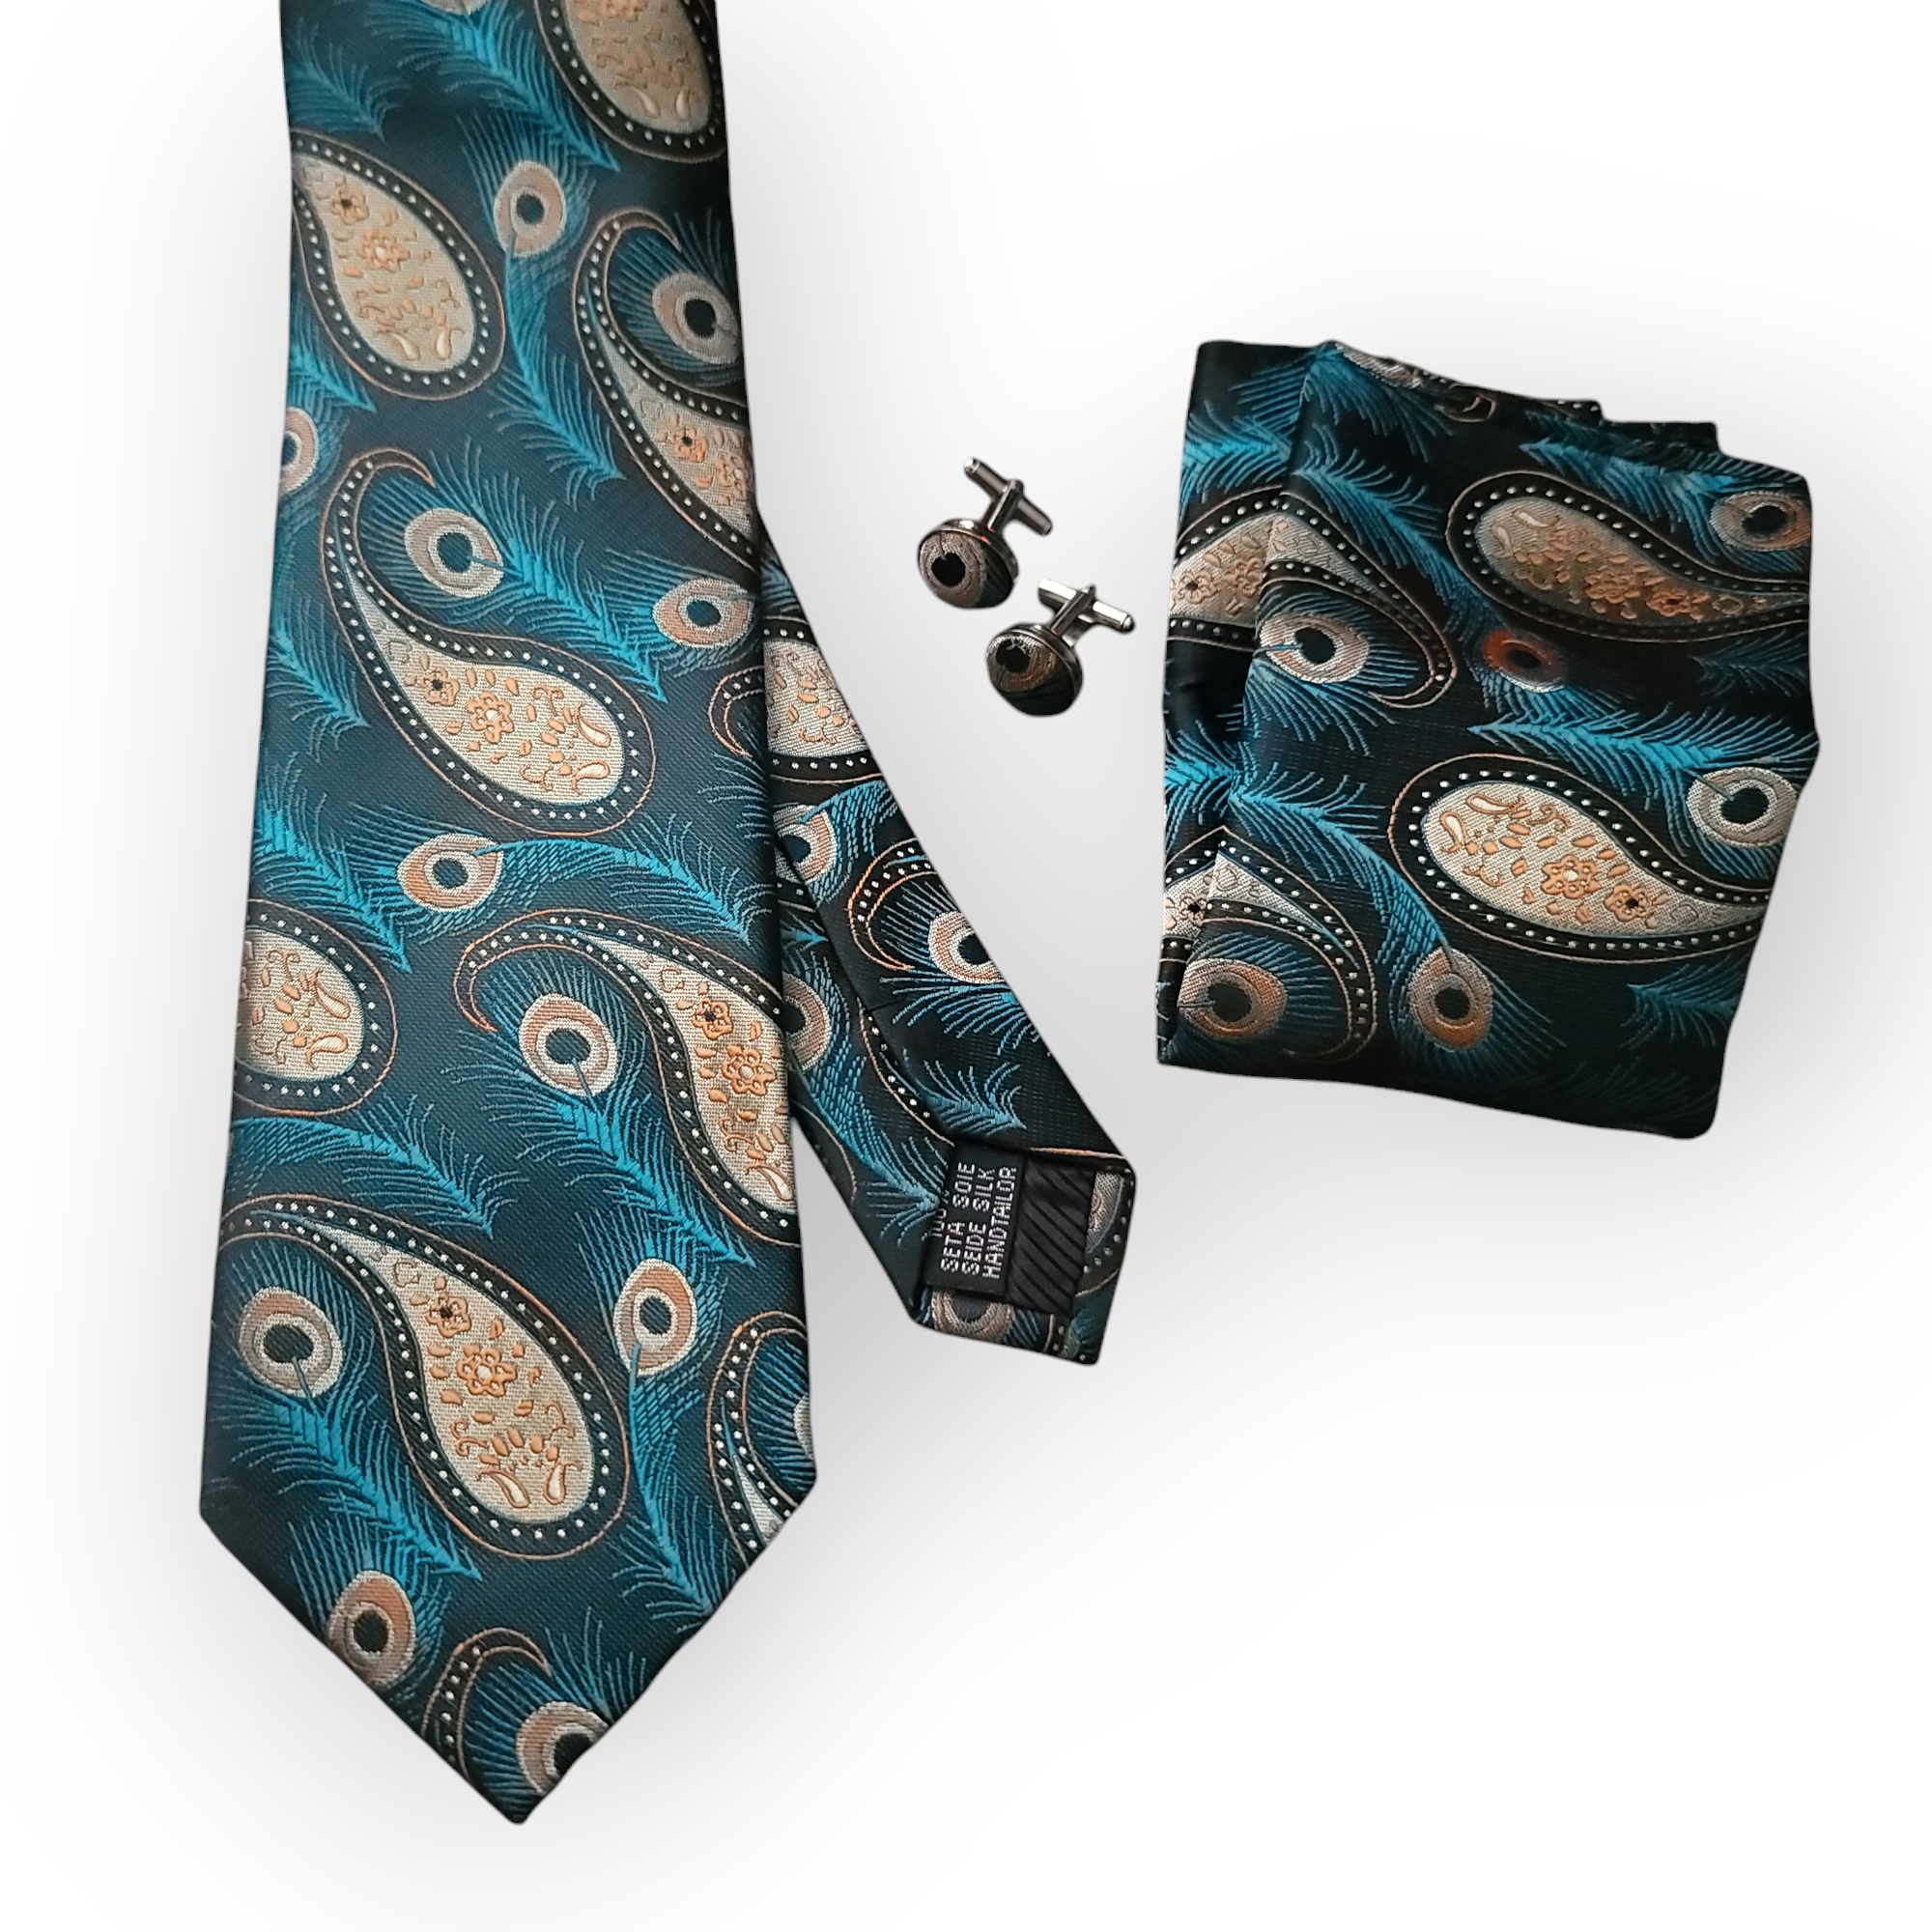 Black Gold Paisley Peacock Feather Silk Tie Pocket Square Cufflink Set